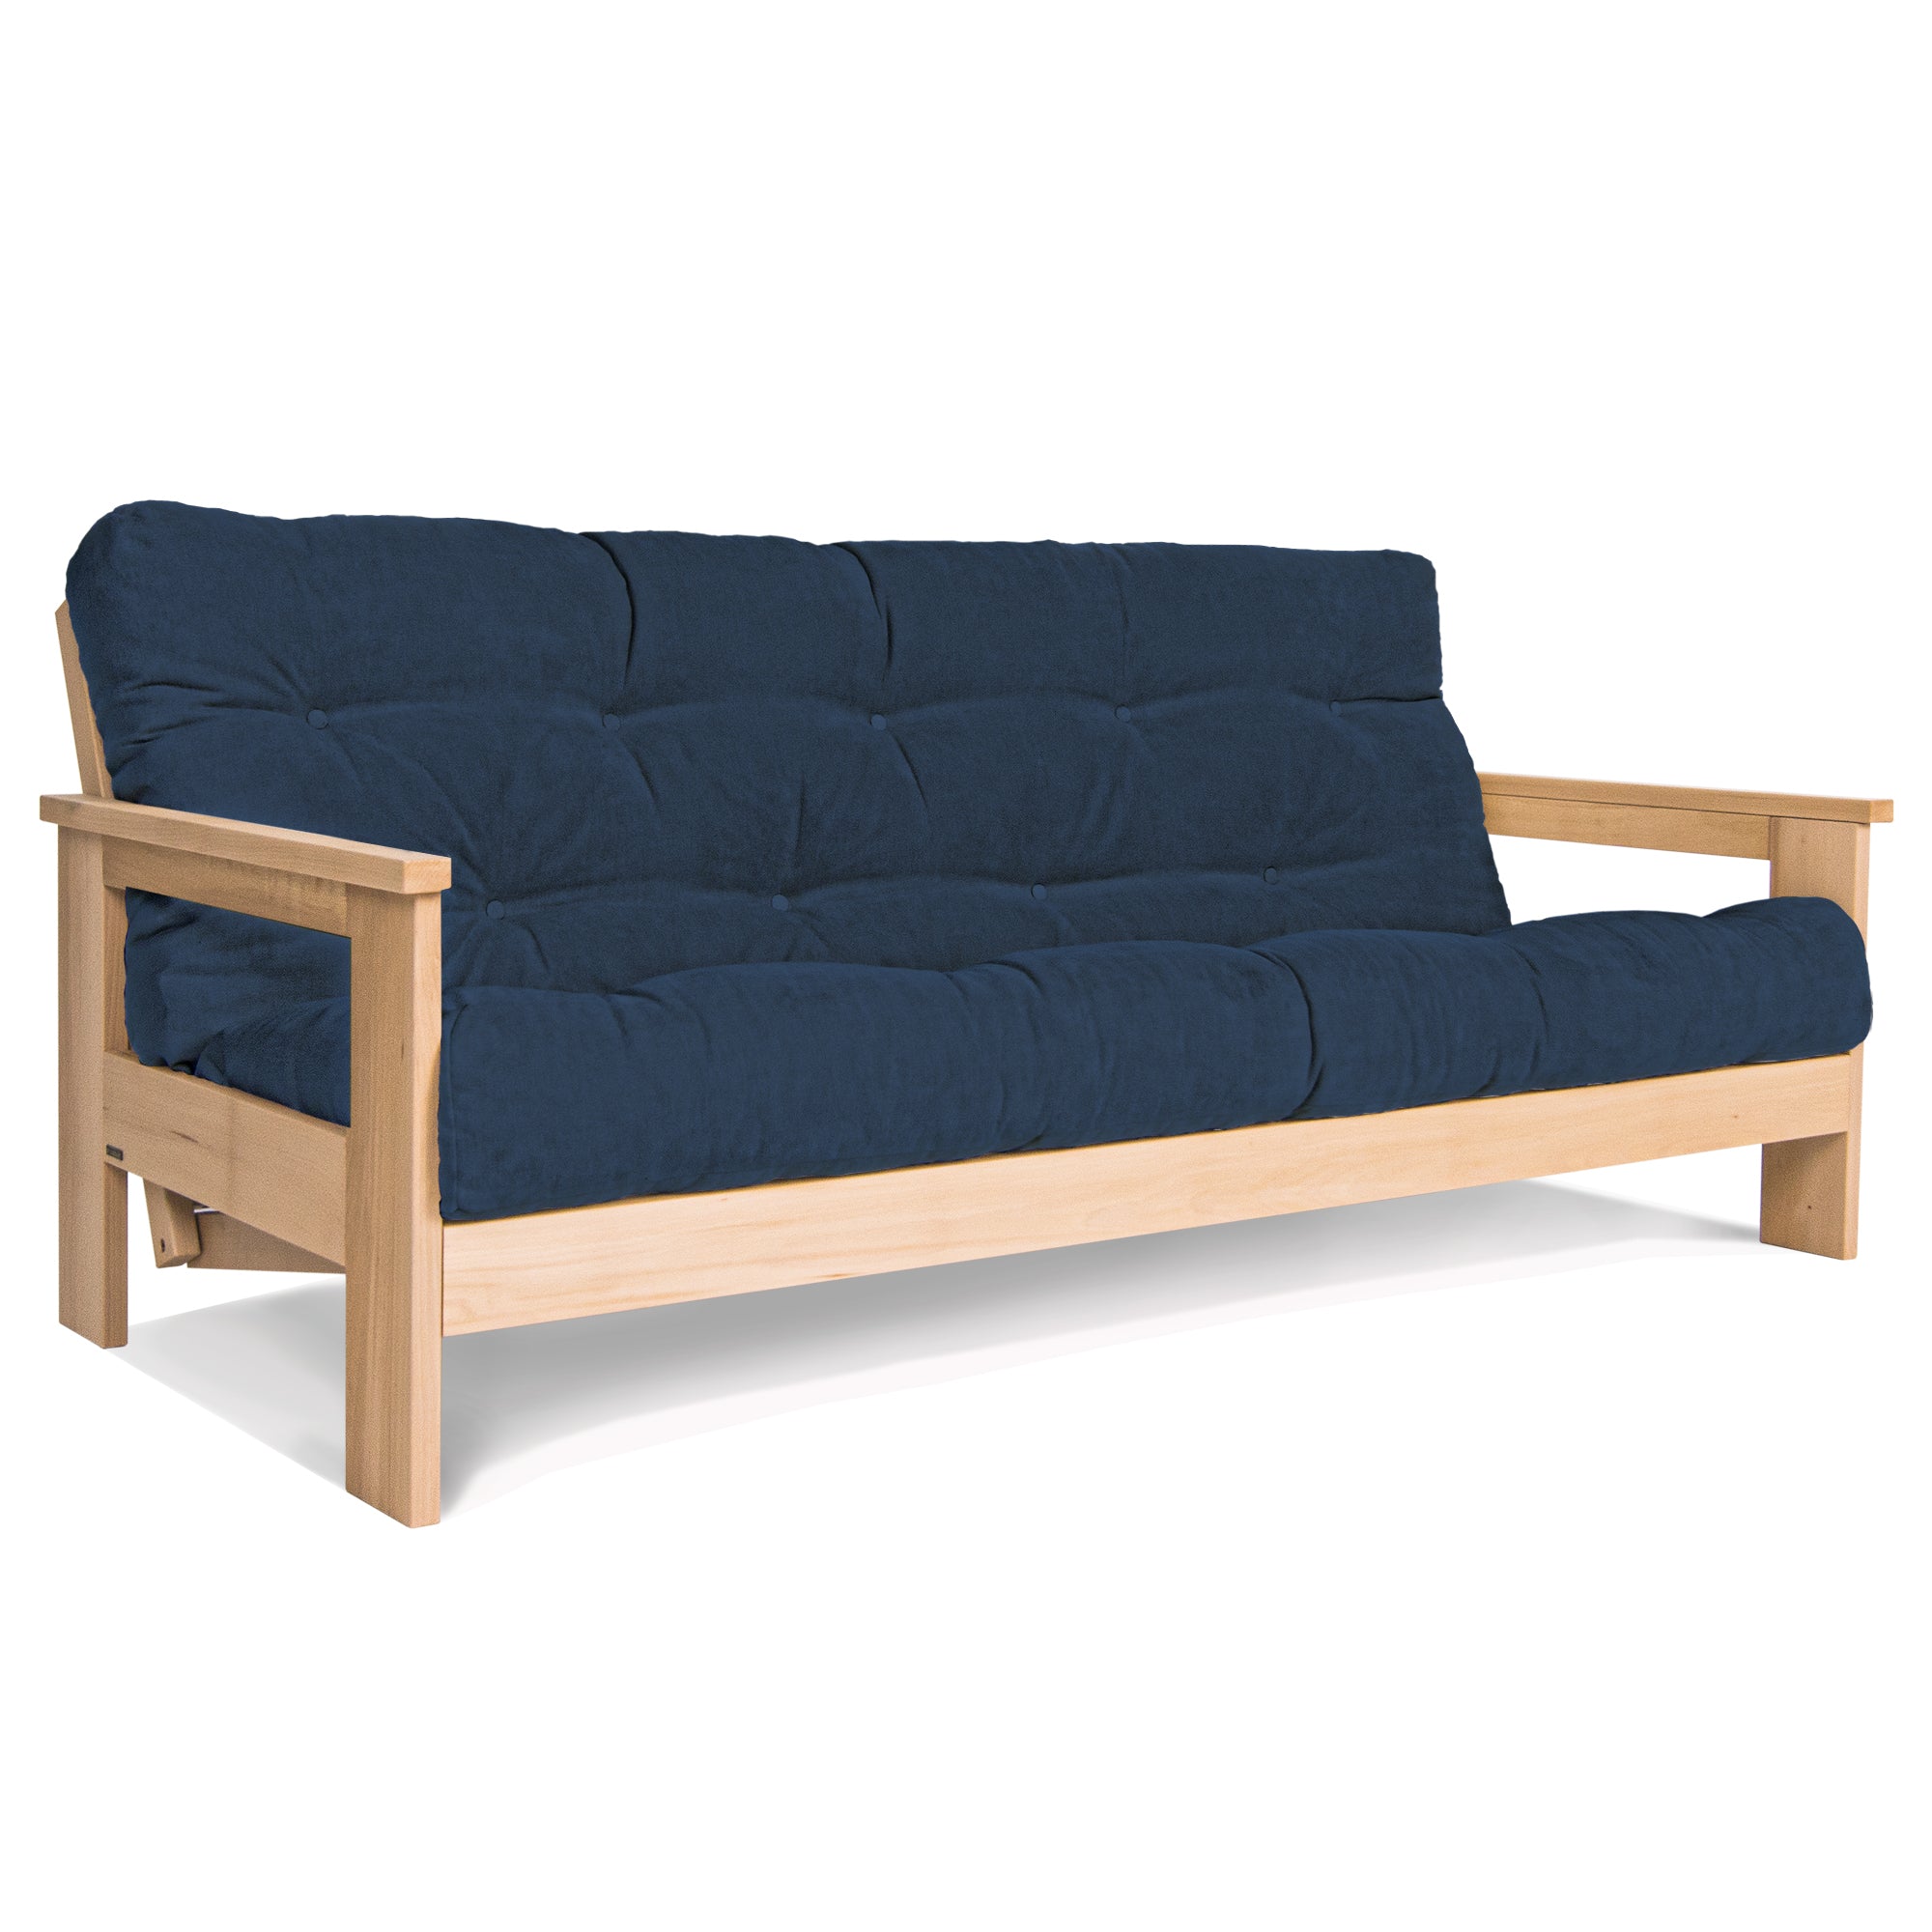 MEXICO Folding Sofa Bed-Beech Wood Frame-Natural Colour--blue fabric